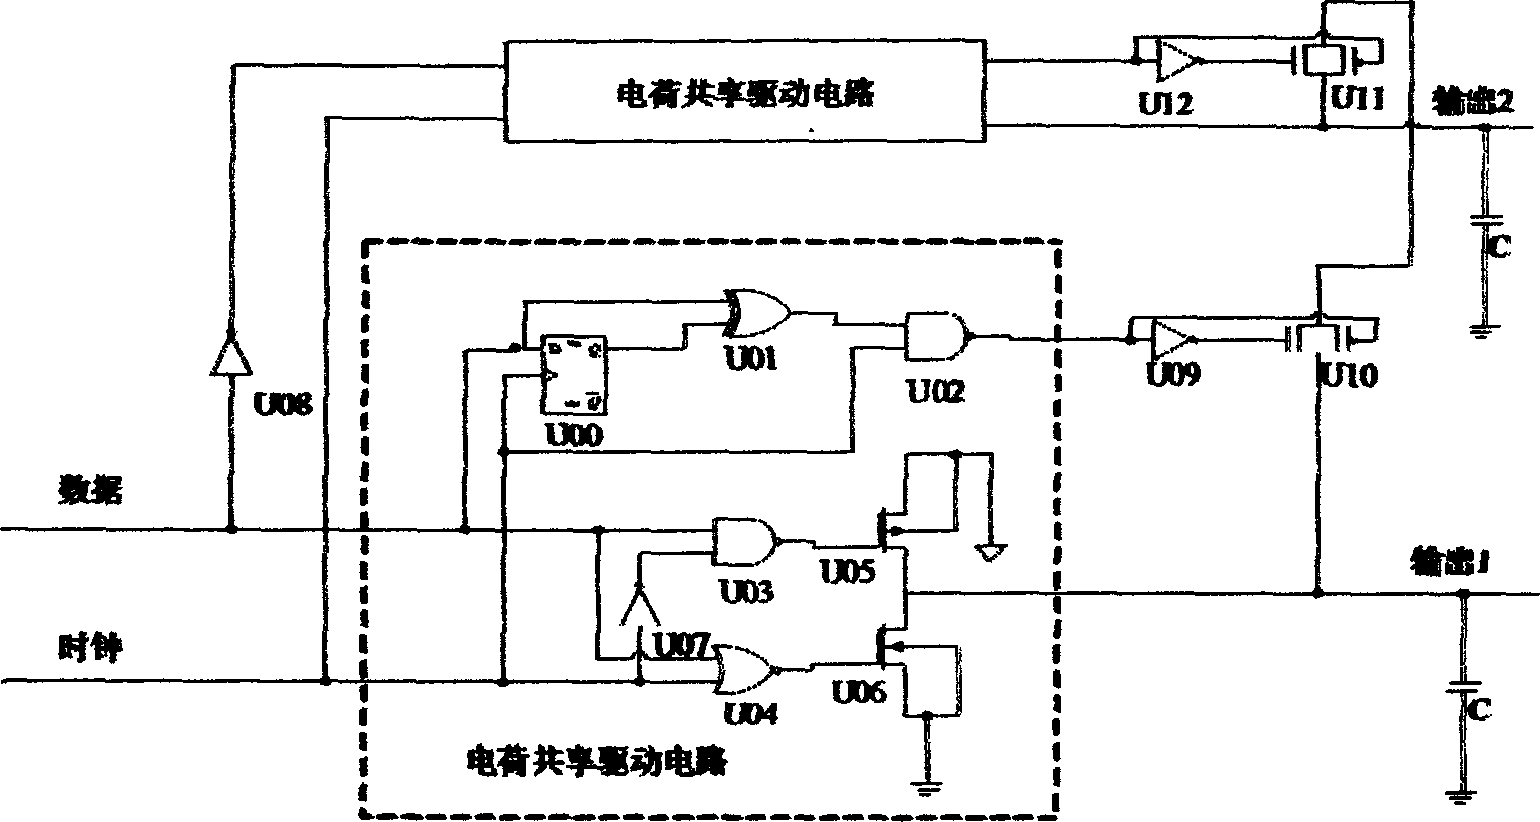 Low power consumption static random memory with low level thread amplitude of oscillation